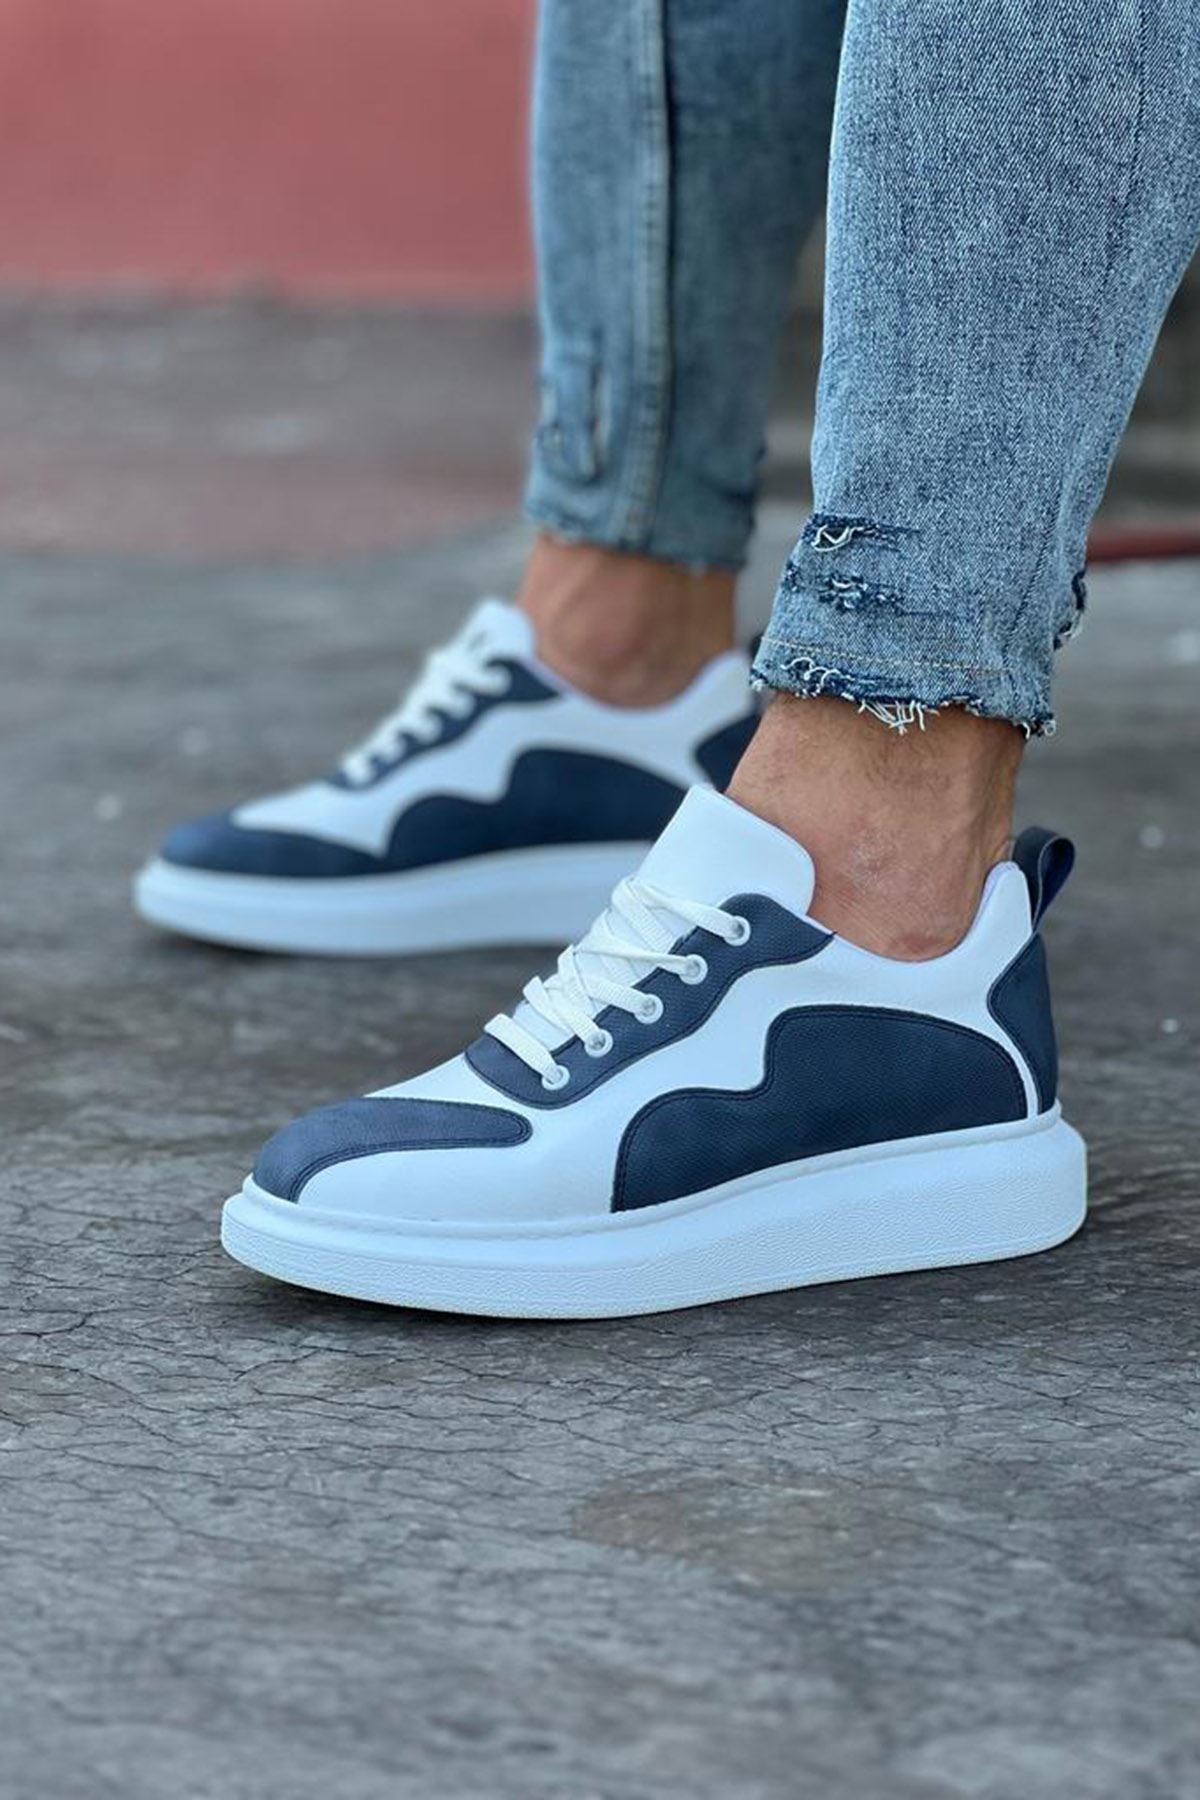 WG301 White Blue Men's Casual Shoes - STREETMODE™